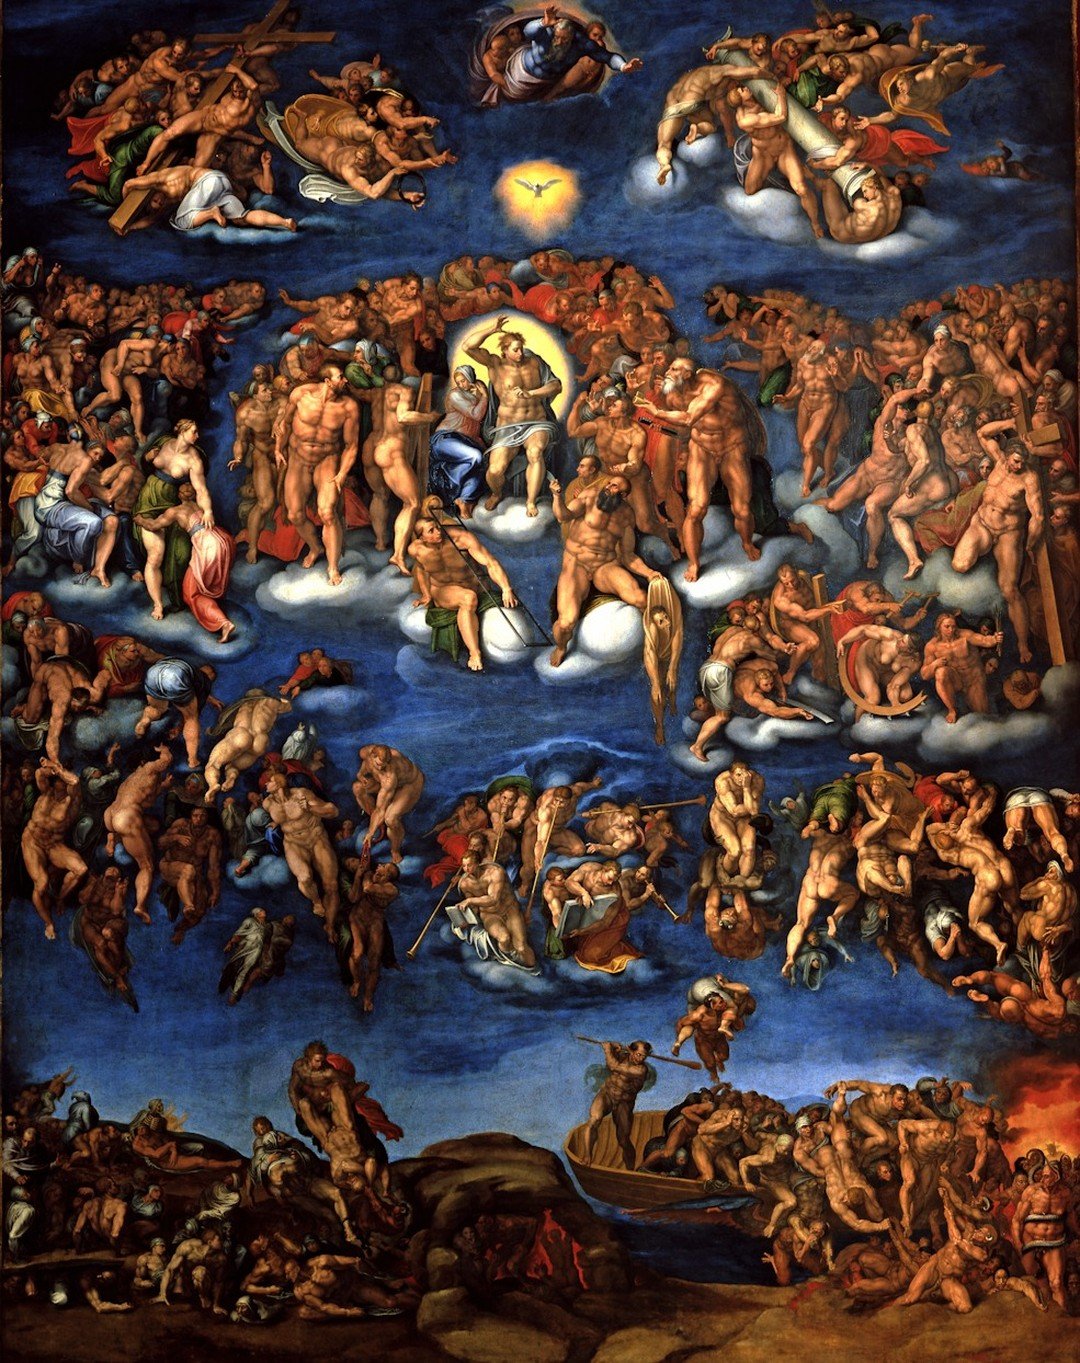 #ascension #lastjudgement
The Feast of the Ascension takes place forty days after Easter. While Easter celebrates Christ&rsquo;s resurrection from the dead, today his entry into Heaven is commemorated. Catholics believe that Christ ascended into Heav